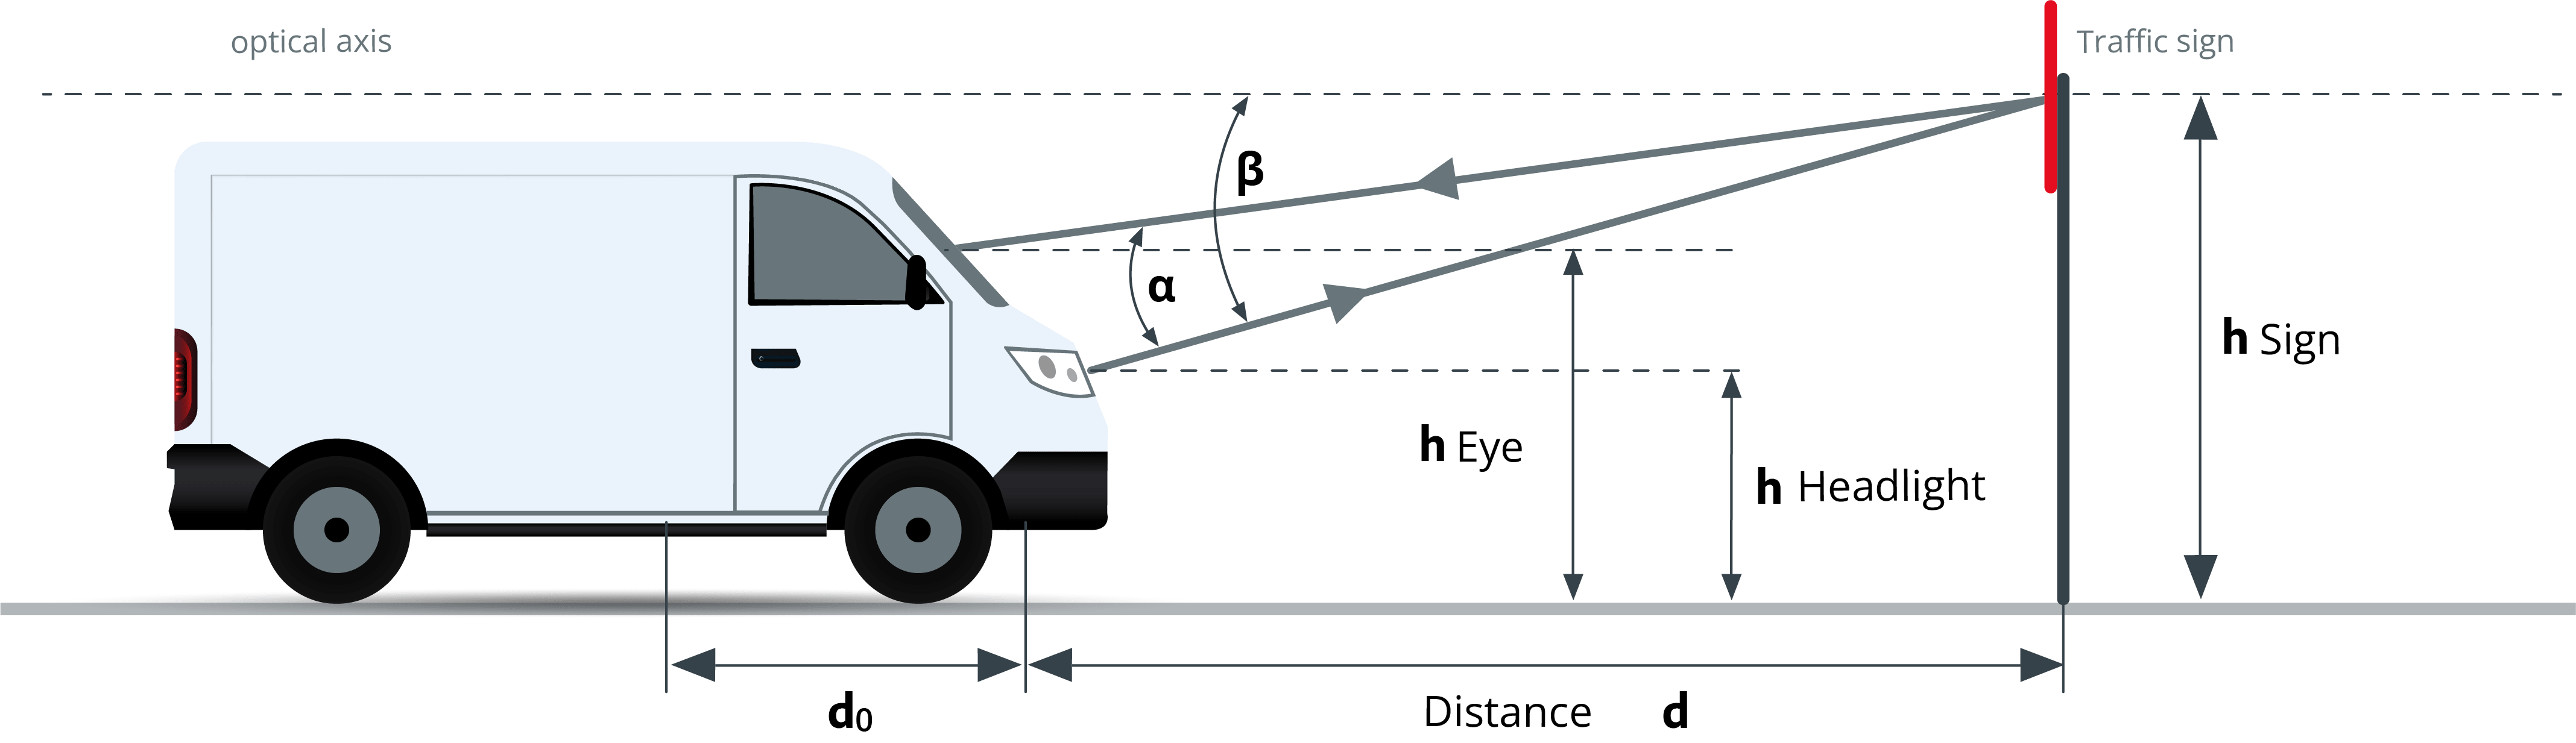 Illustration explaining observation angle and illumination angle using an example sitaution with a car driving towards traffic sign